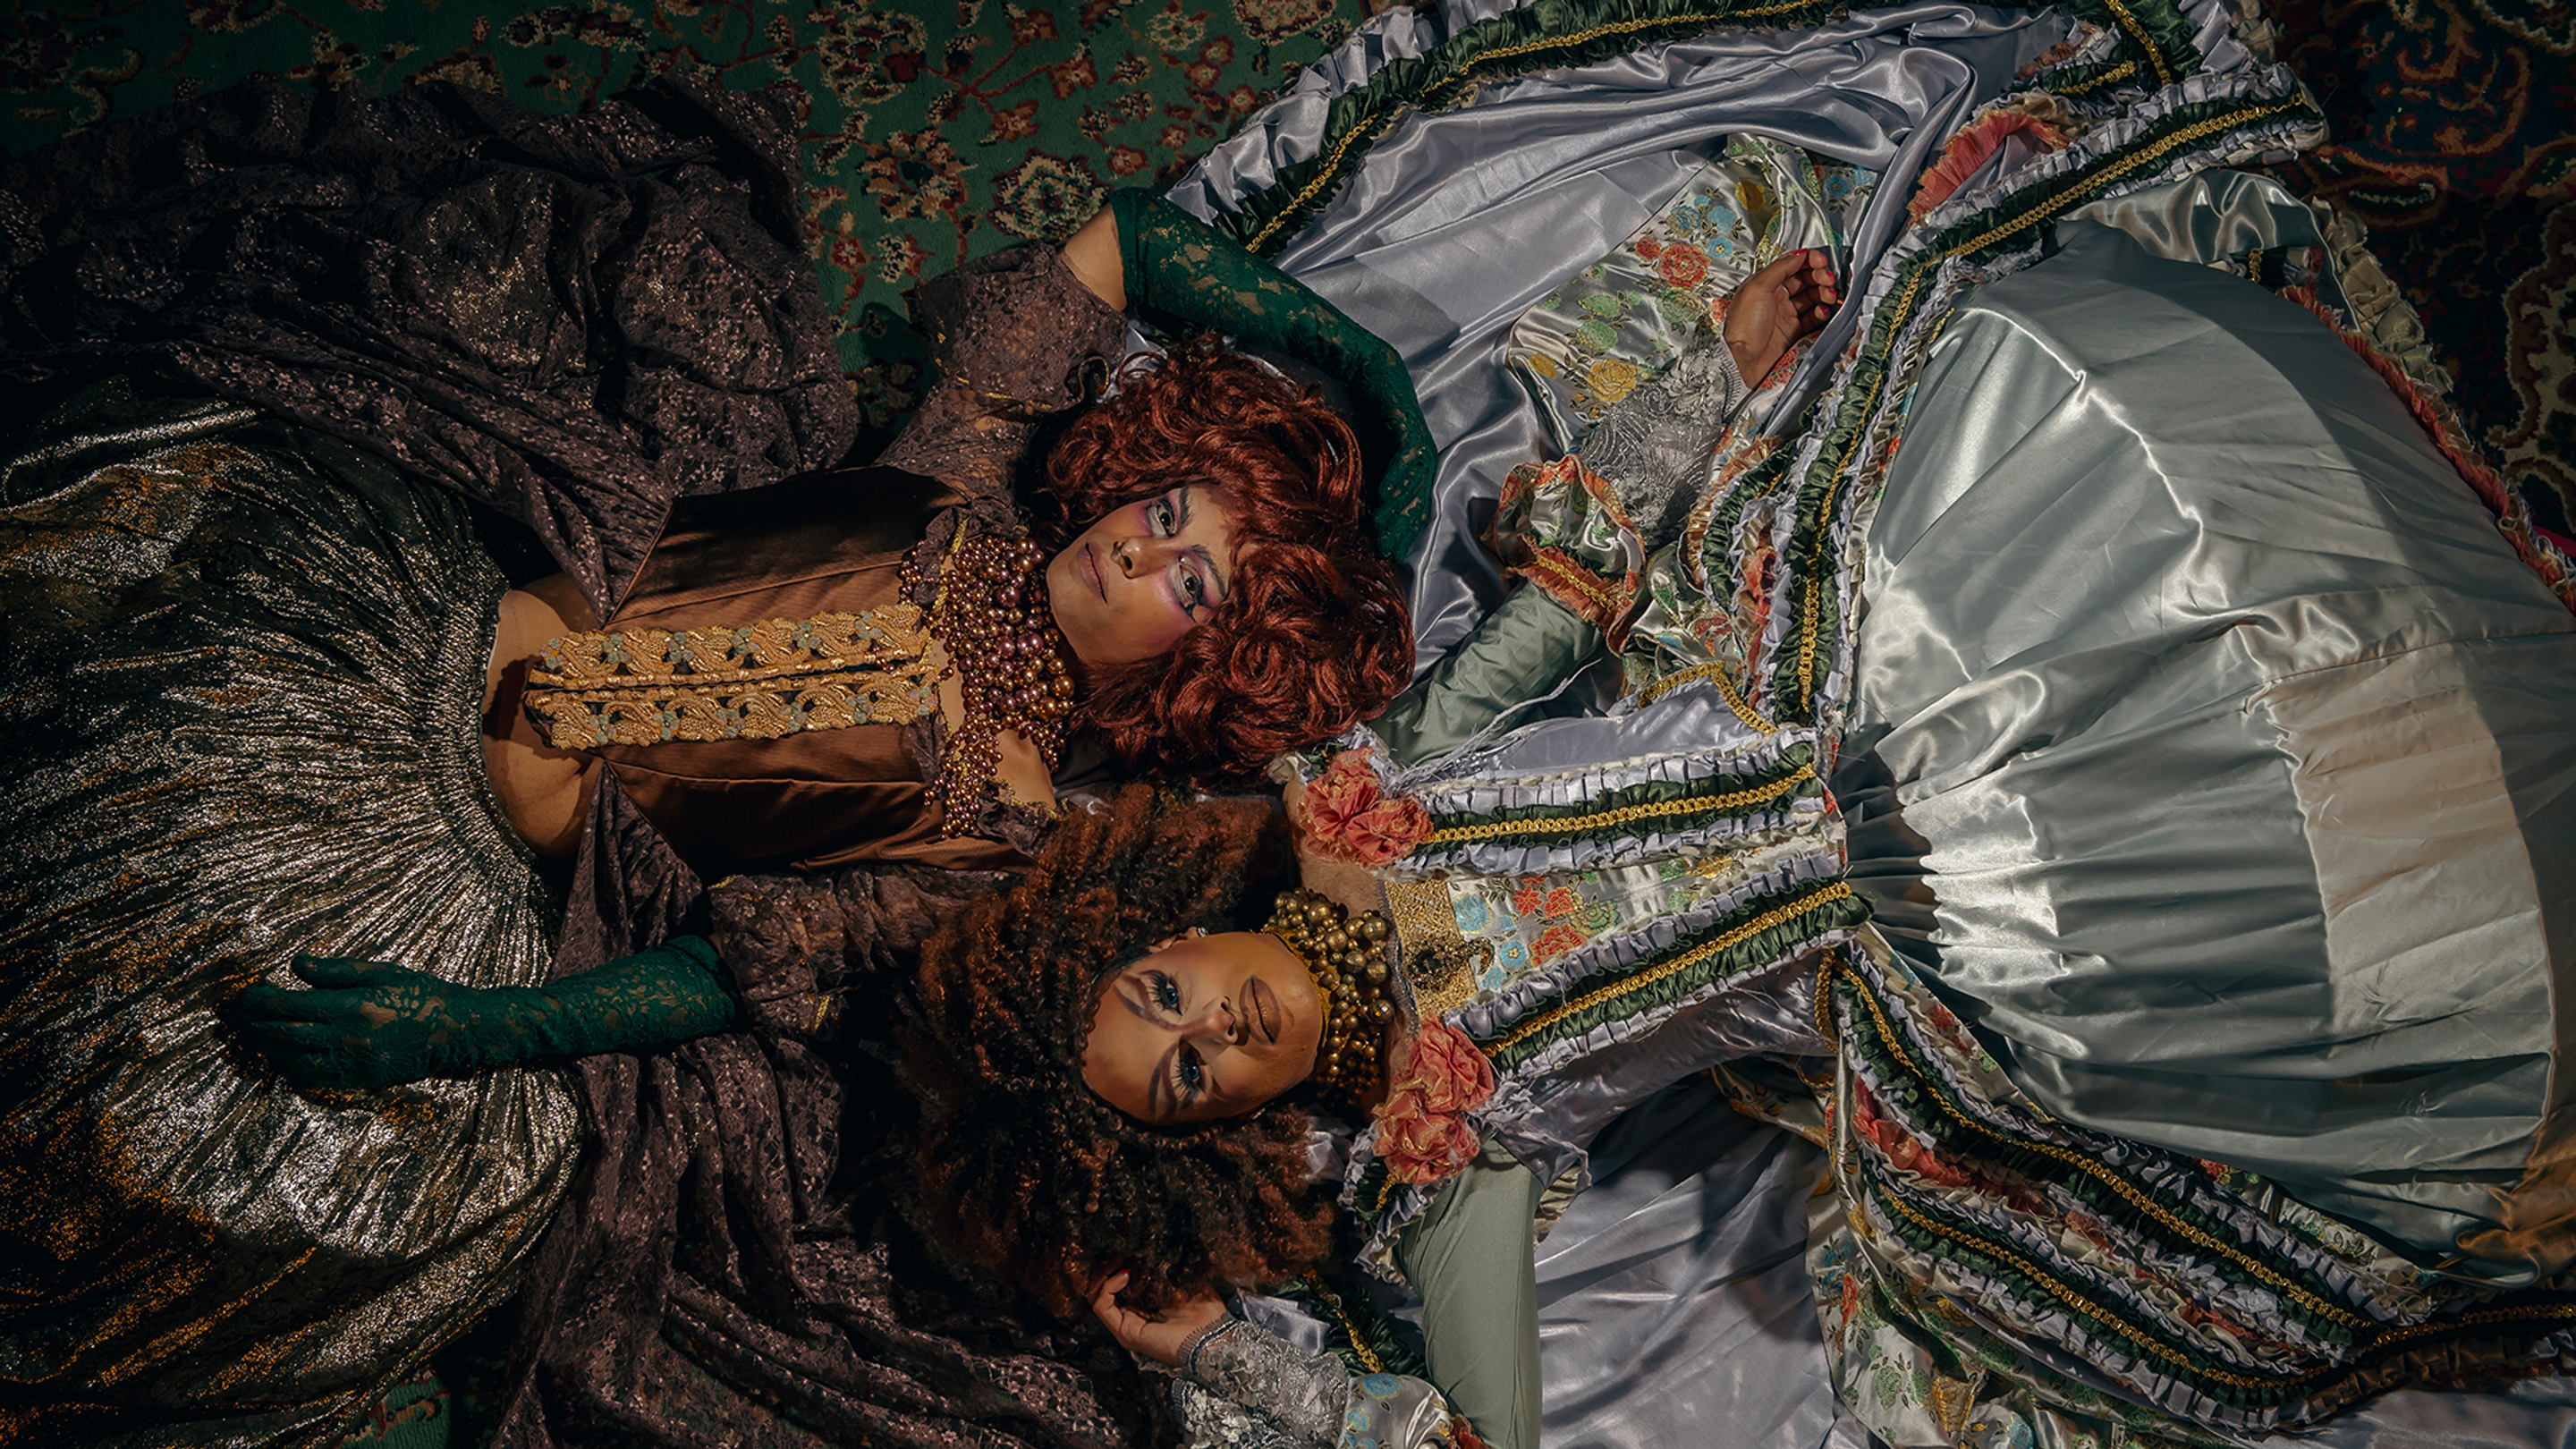 An aerial shot of two drag queens laying on their backs in full Elizabethan gowns and wigs